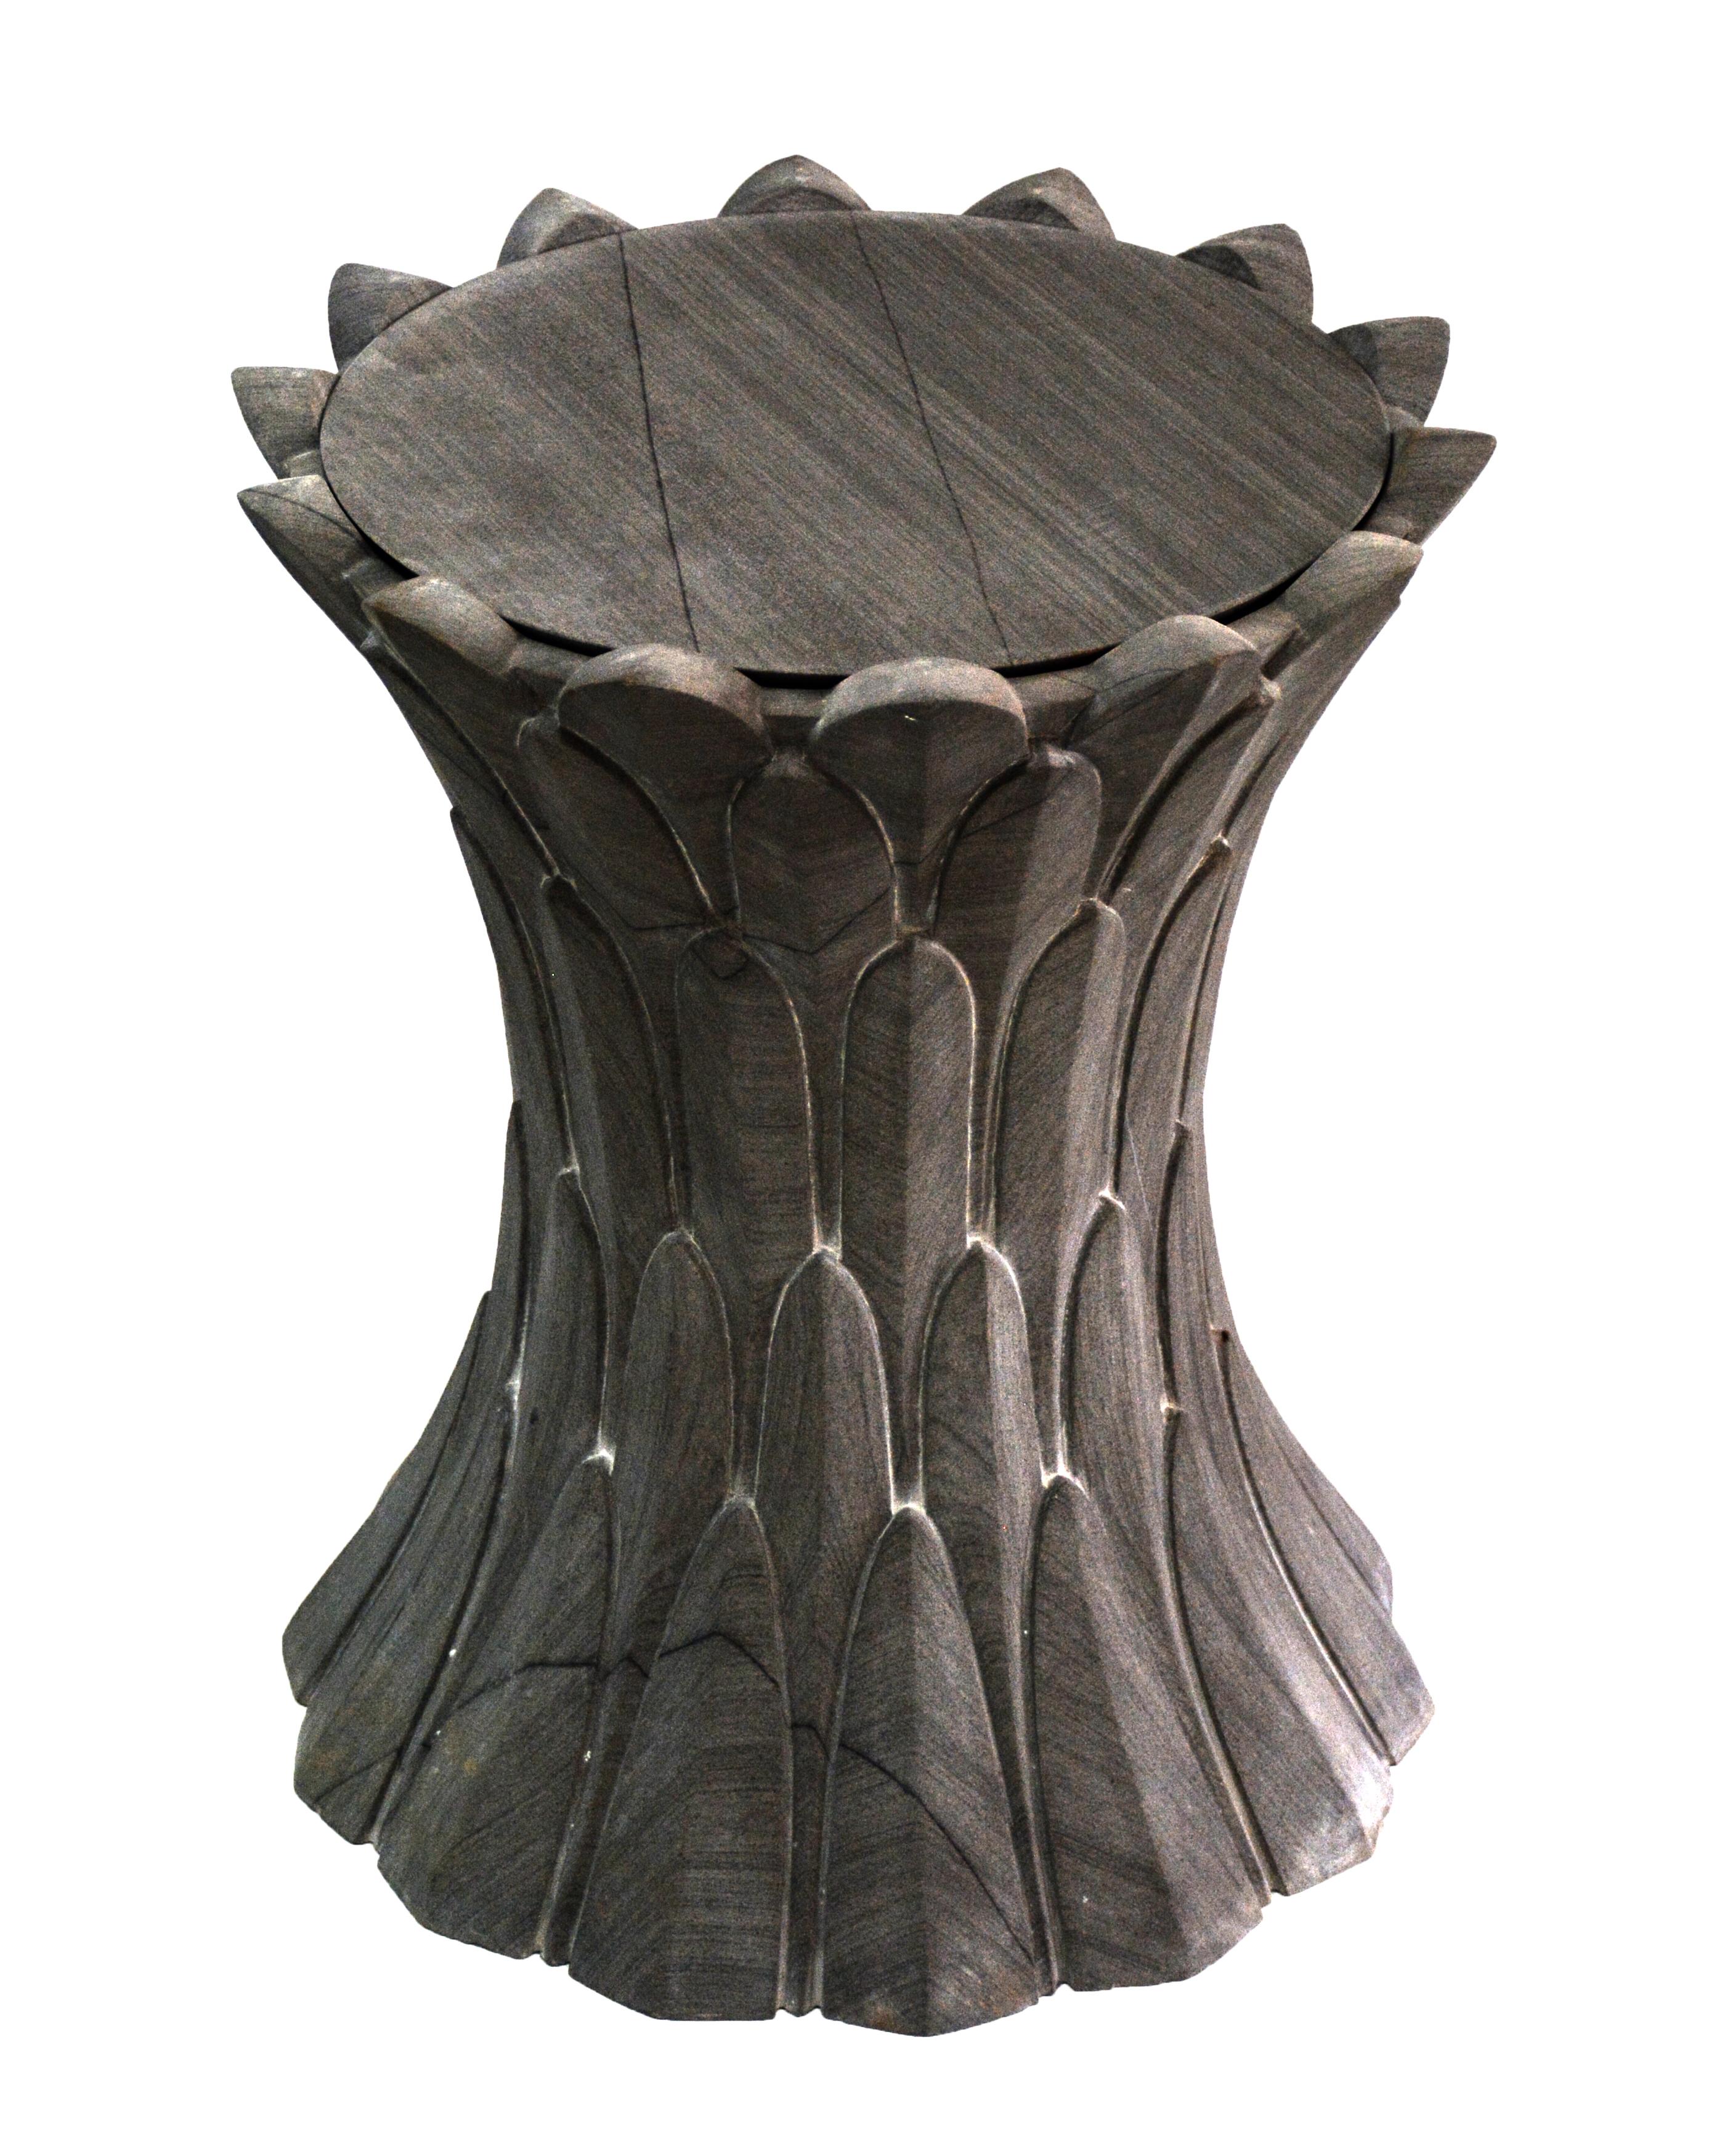 Contemporary Feathers Art Deco Side Table in Agra Grey Stone Designed by Stephanie Odegard For Sale